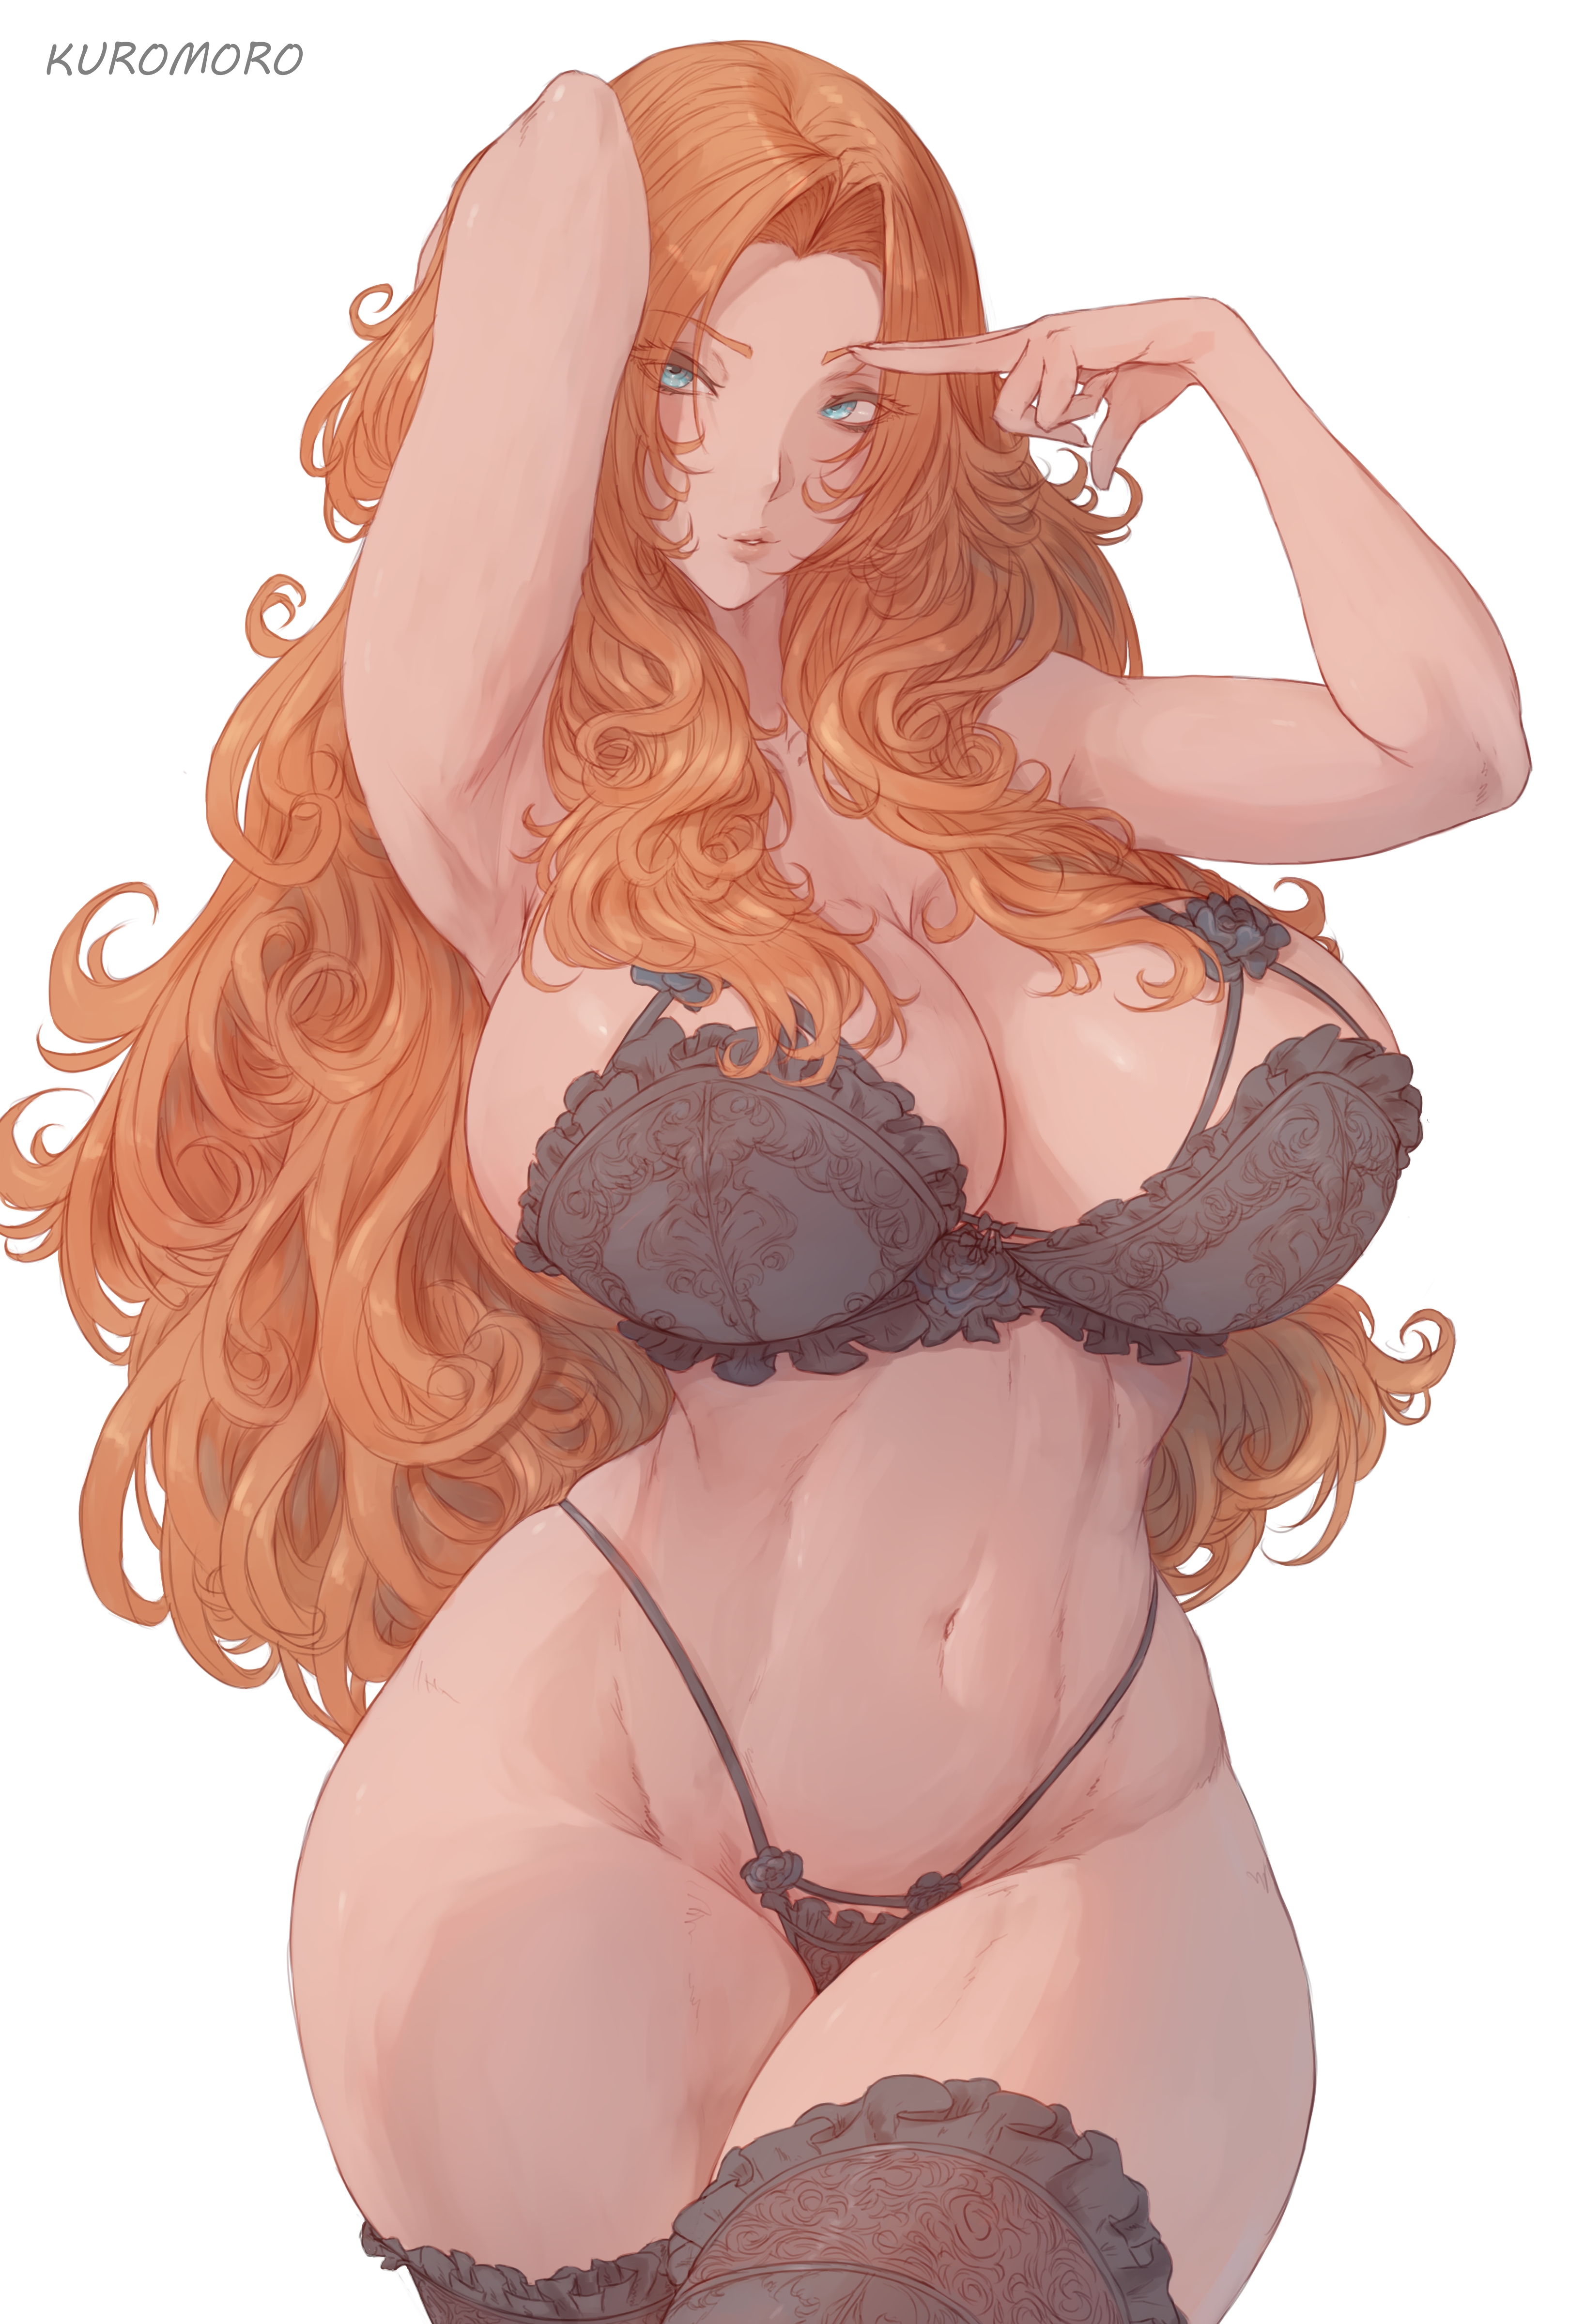 Anime 3240x4800 Matsumoto Rangiku boobs anime girls anime black underwear thick body underwear looking at viewer thighs thick thigh huge breasts cleavage lace lingerie black stockings stockings simple background bra white background belly minimalism shinigami kuromoro black panties black bras long hair redhead blue eyes belly button curvy signature